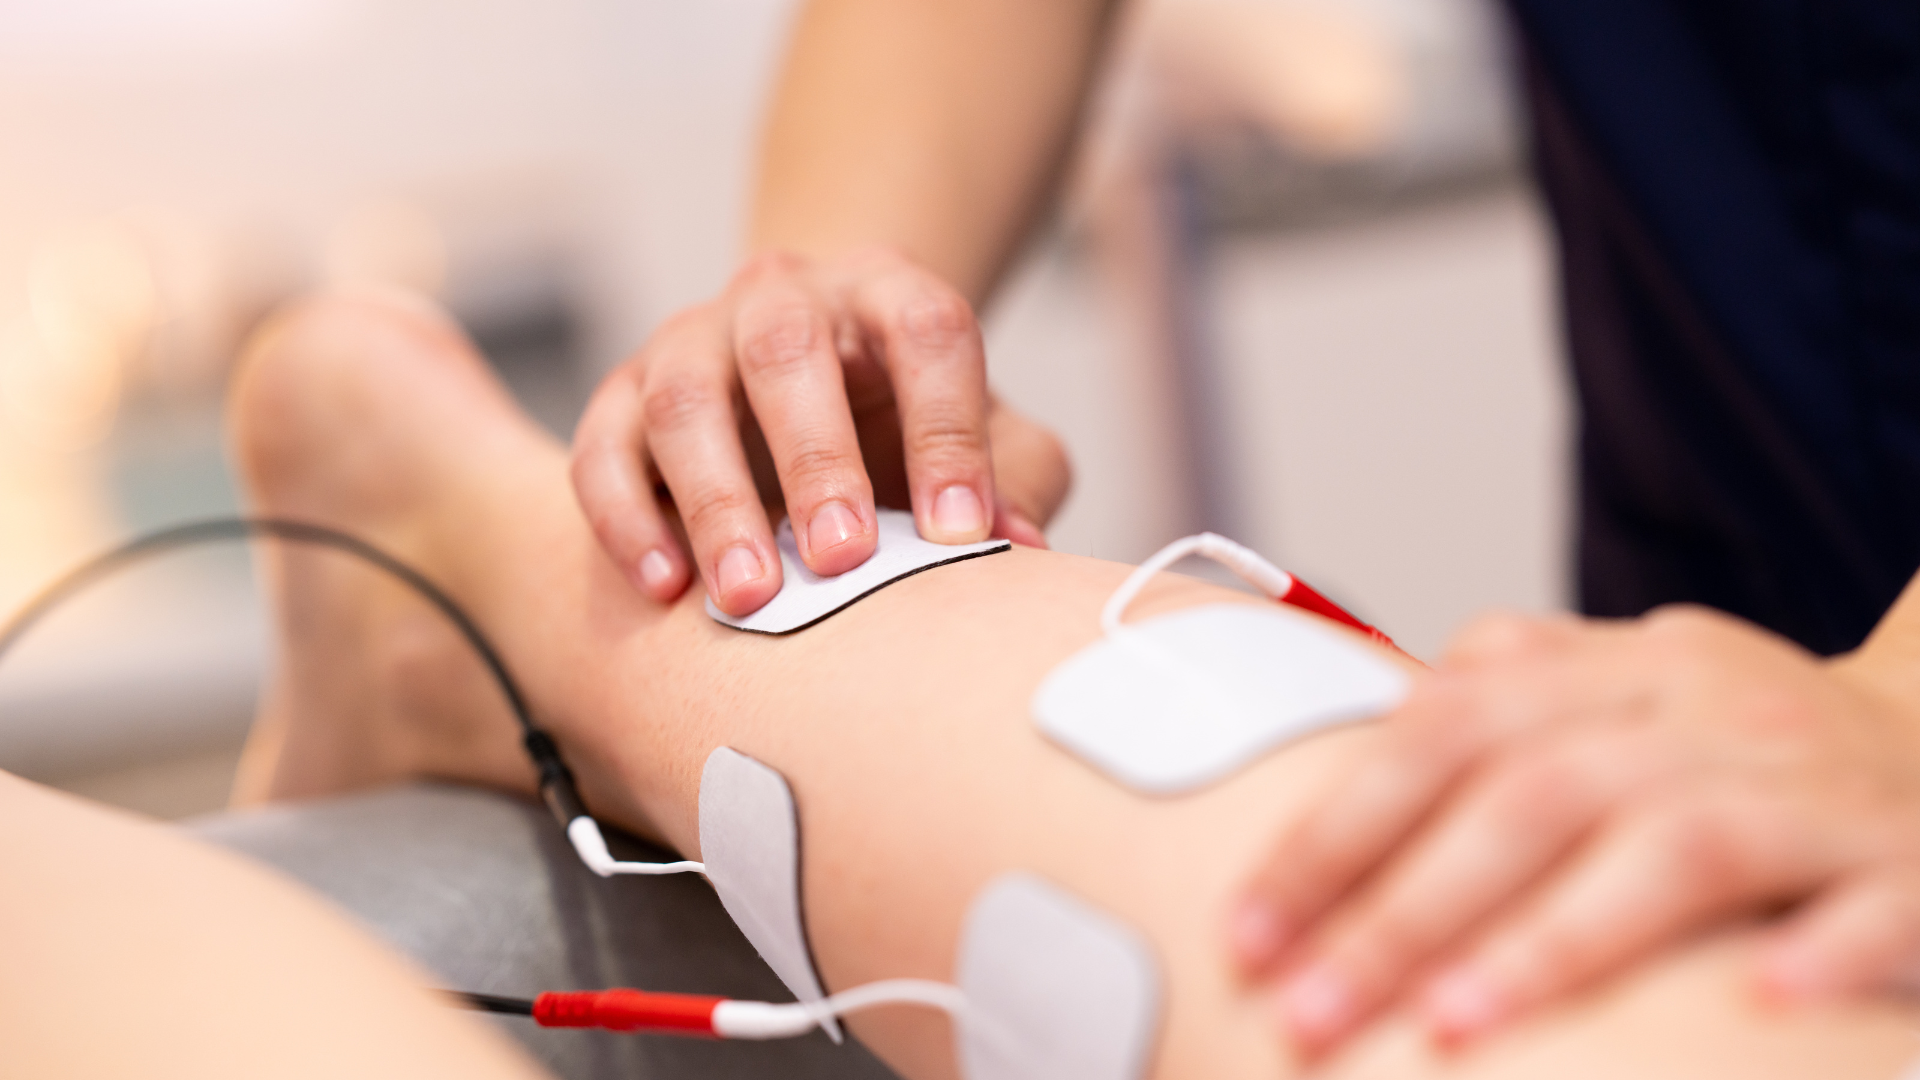 Neuromuscular Electrical Stimulation (NMES) for Rehabilitation